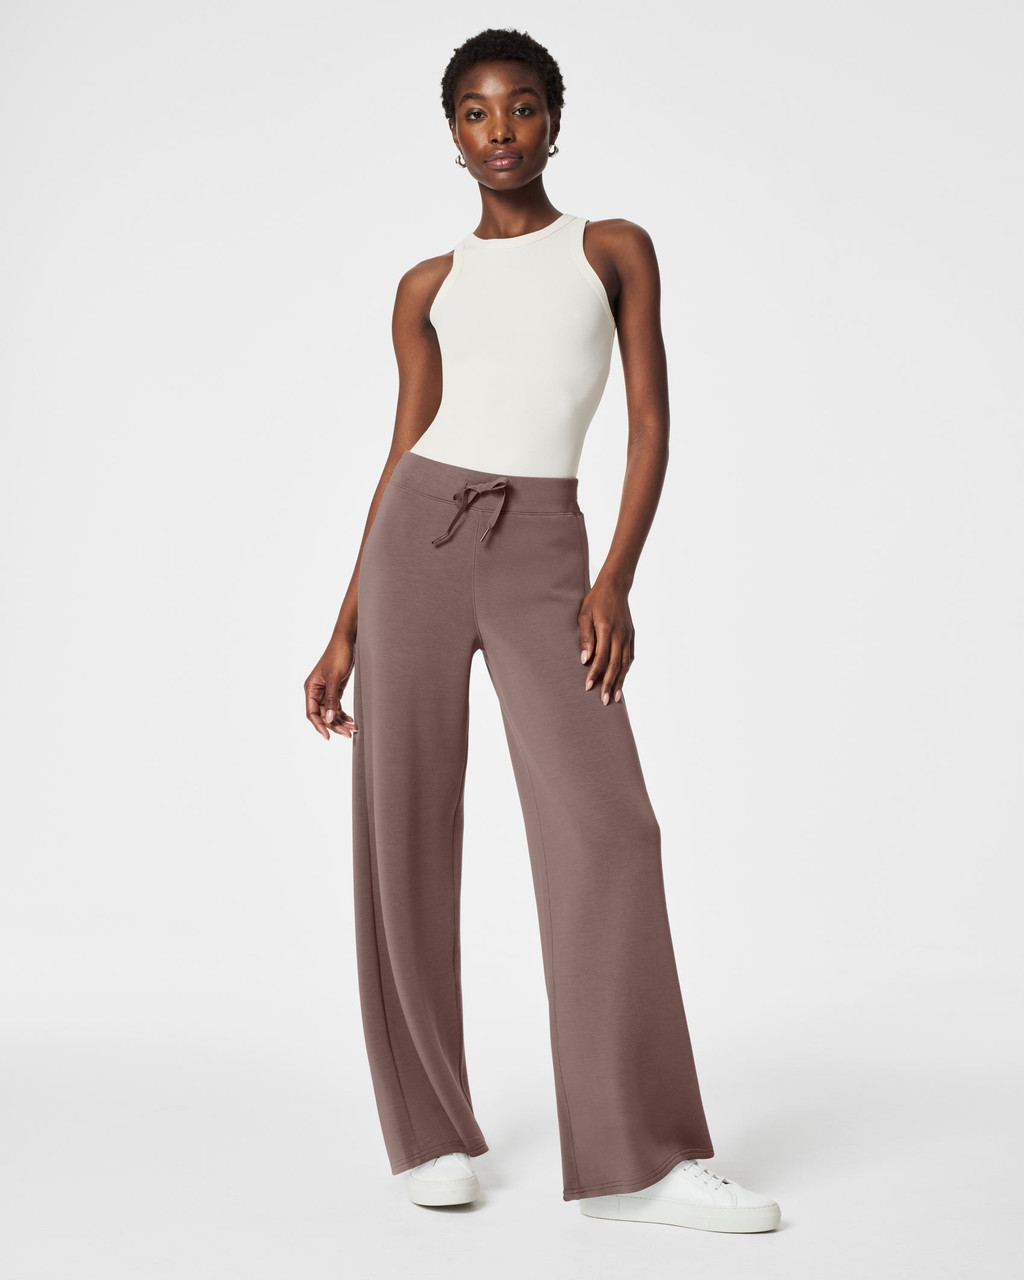 AirEssentials Wide Leg Pant- Smoke